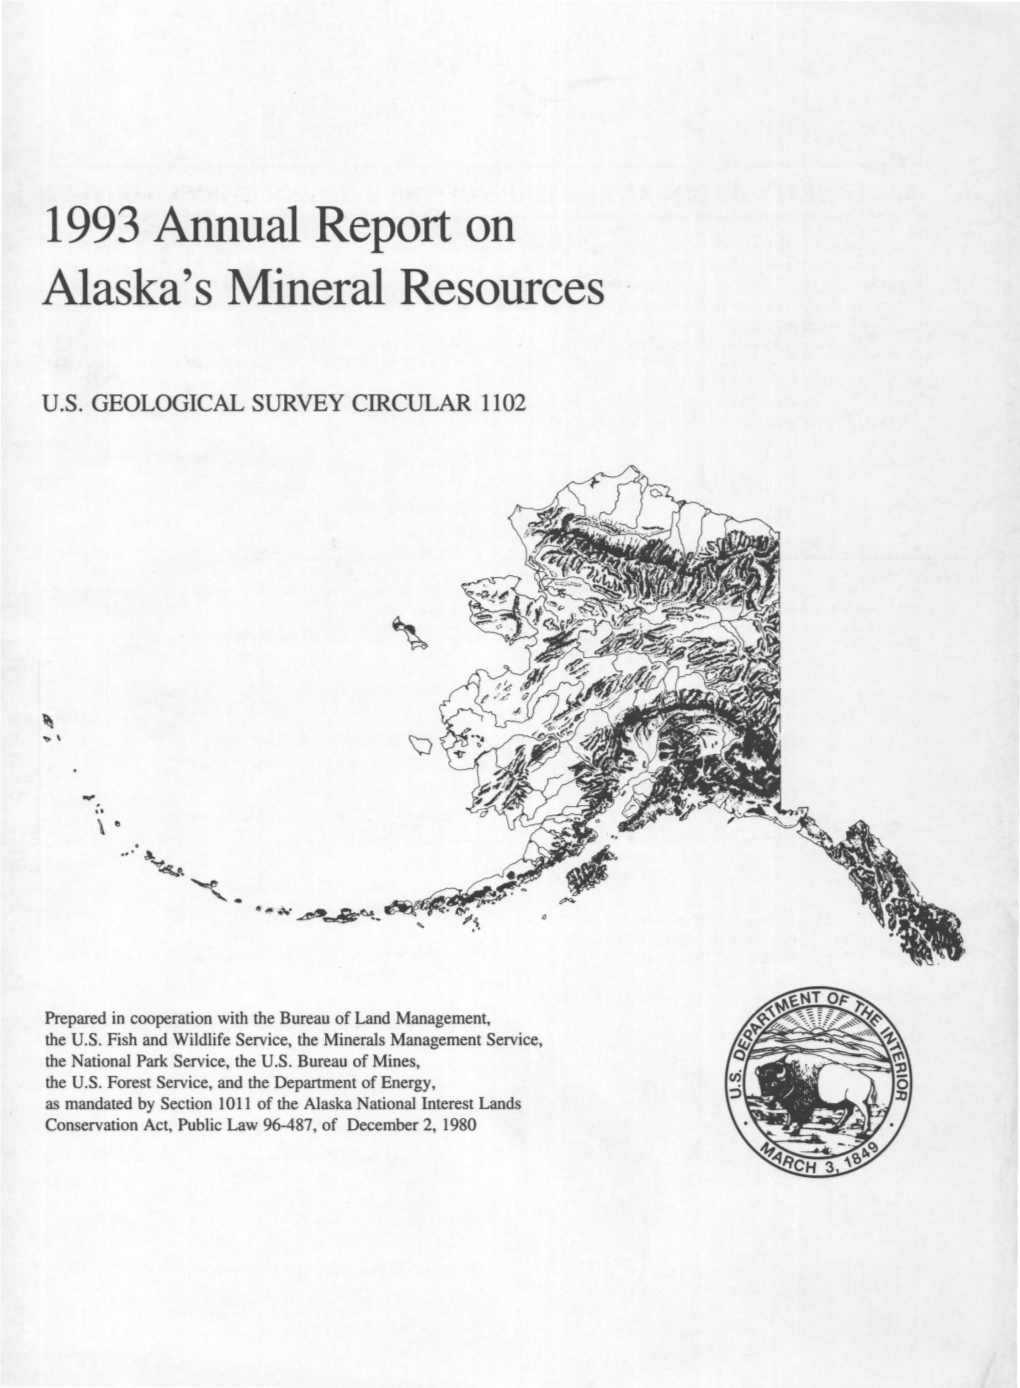 1993 Annual Report on Alaska's Mineral Resources